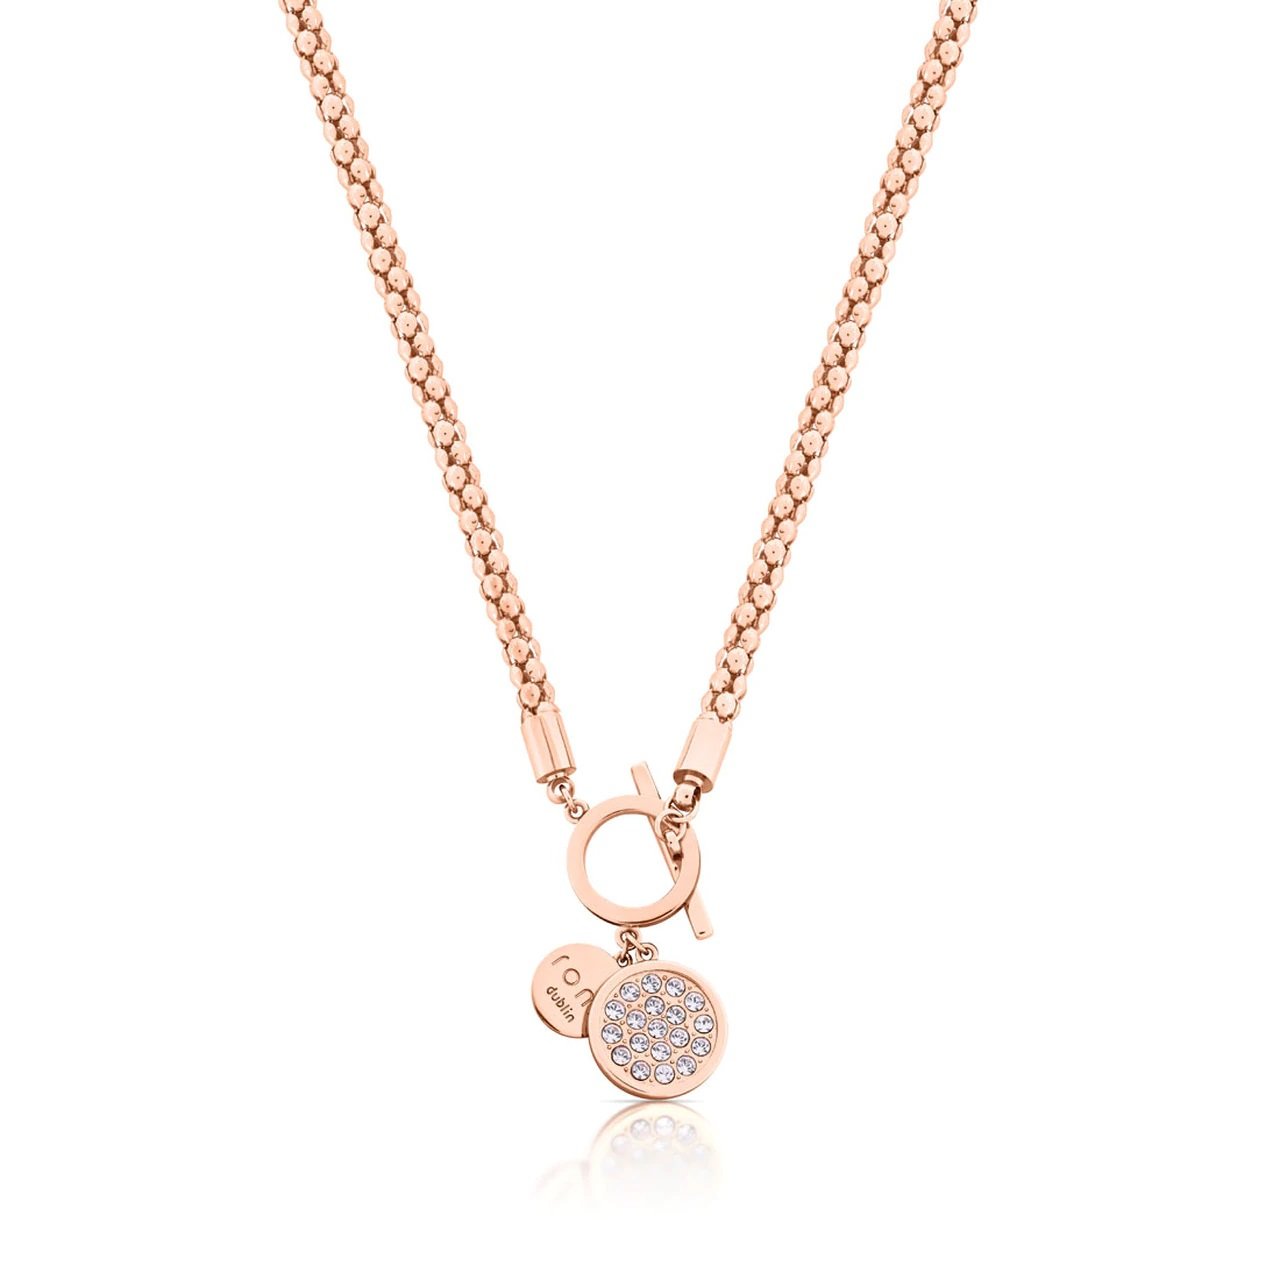 Romi Dublin Rose Gold Popcorn Chain Necklace  Simple and understated this collection has a contemporary and sleek look that will allow you to accessorise with any outfit.